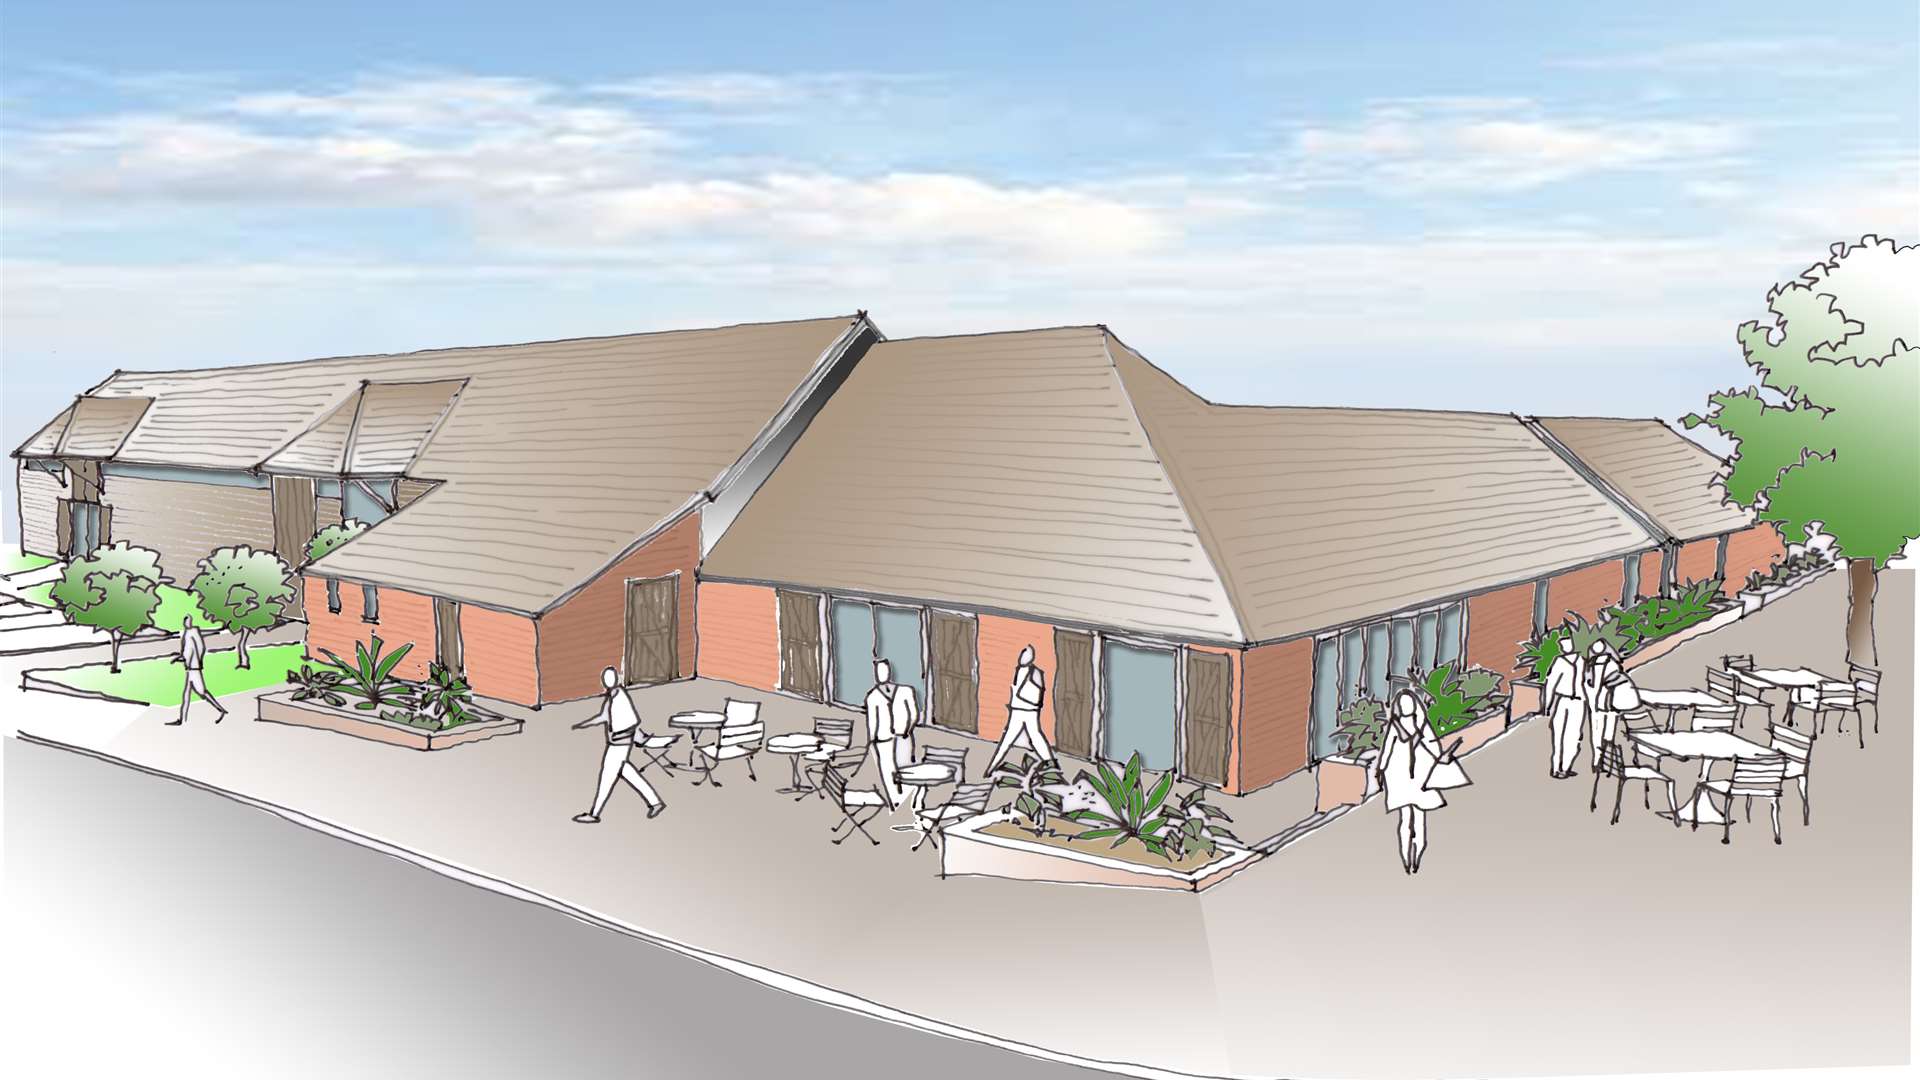 An artist's impression of what a renovated Repton Manor Barn could look like